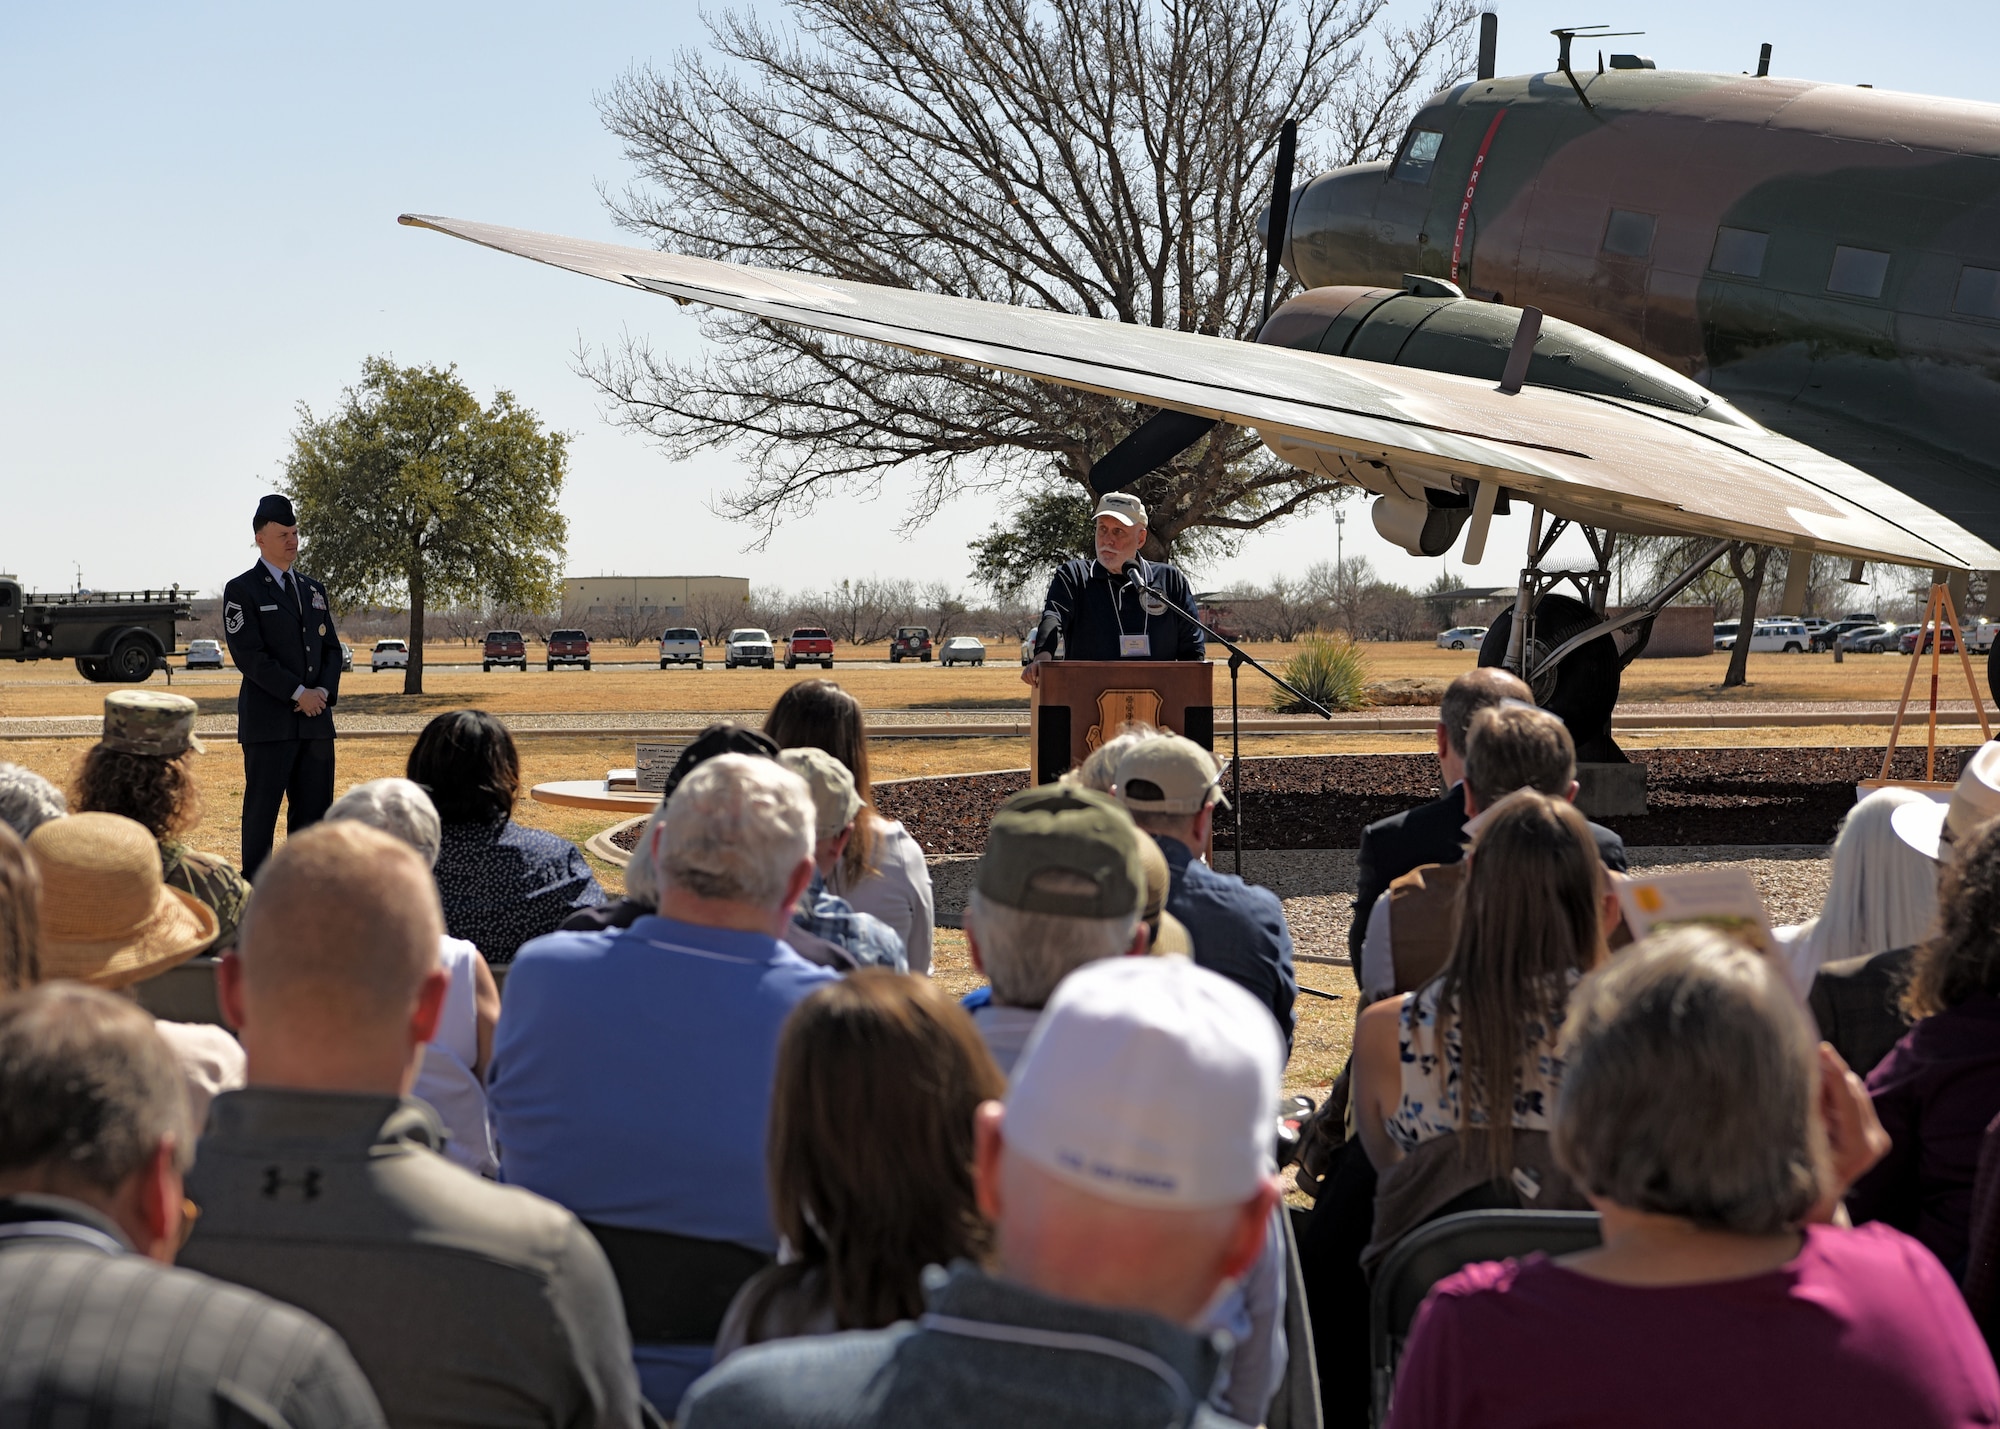 Mr. Joe Martin, U.S. Air Force veteran, speaks at the dedication of the Weyandt-Eddy Memorial Plaza at Goodfellow Air Force Base, Texas, March 25, 2022. Martin’s speech paid tribute to Lt. Col. David H. Eddy. (U.S. Air Force photo by Senior Airman Abbey Rieves)